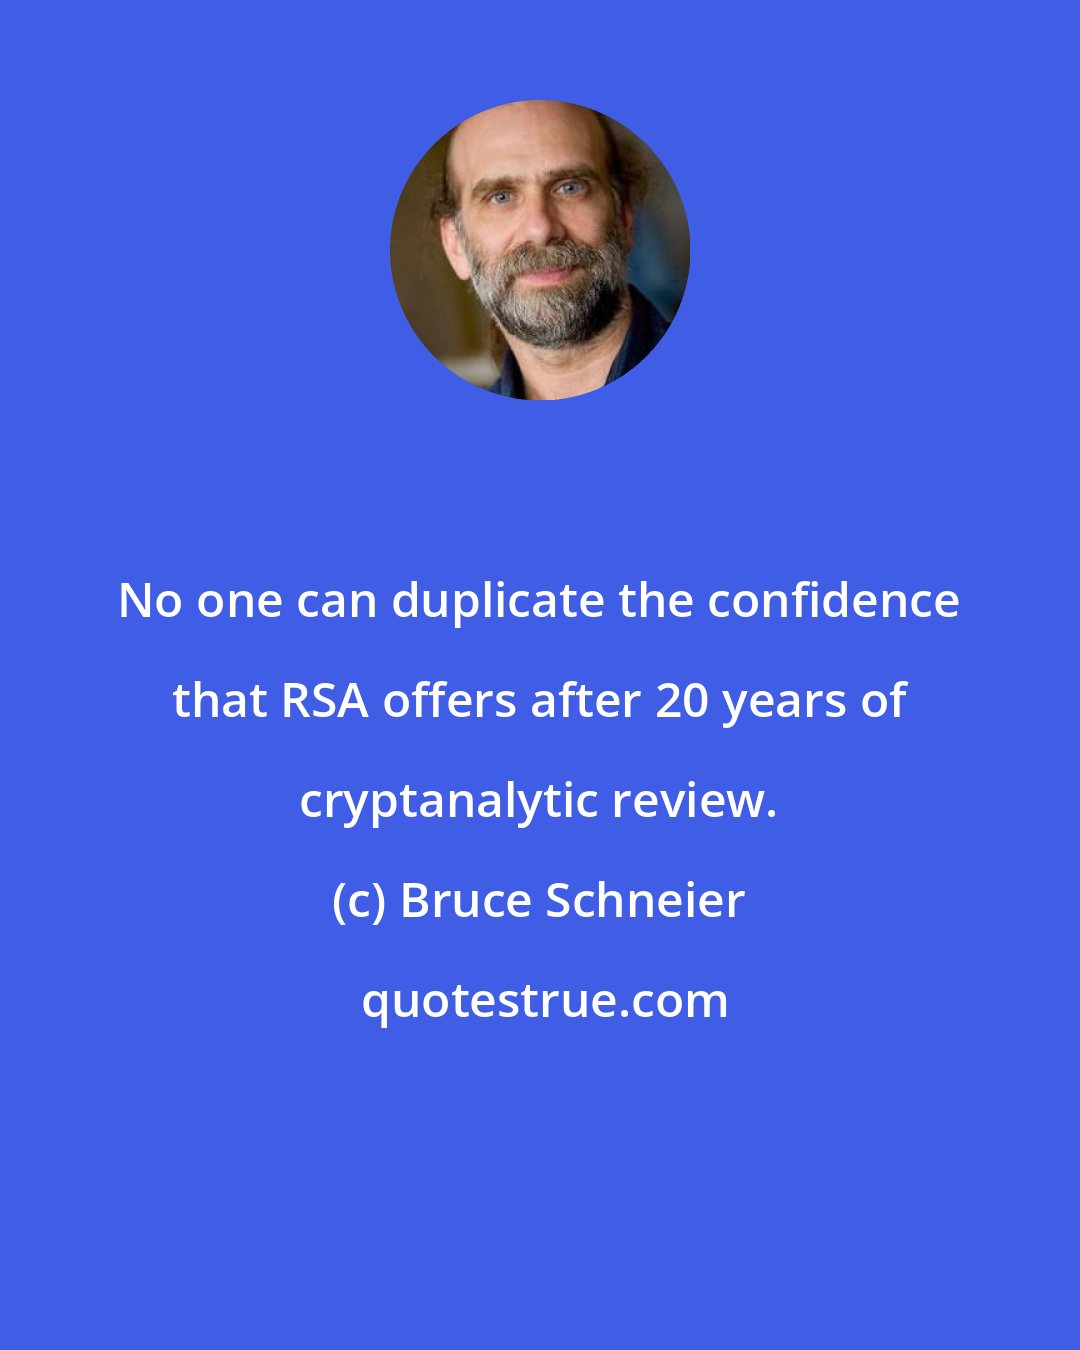 Bruce Schneier: No one can duplicate the confidence that RSA offers after 20 years of cryptanalytic review.